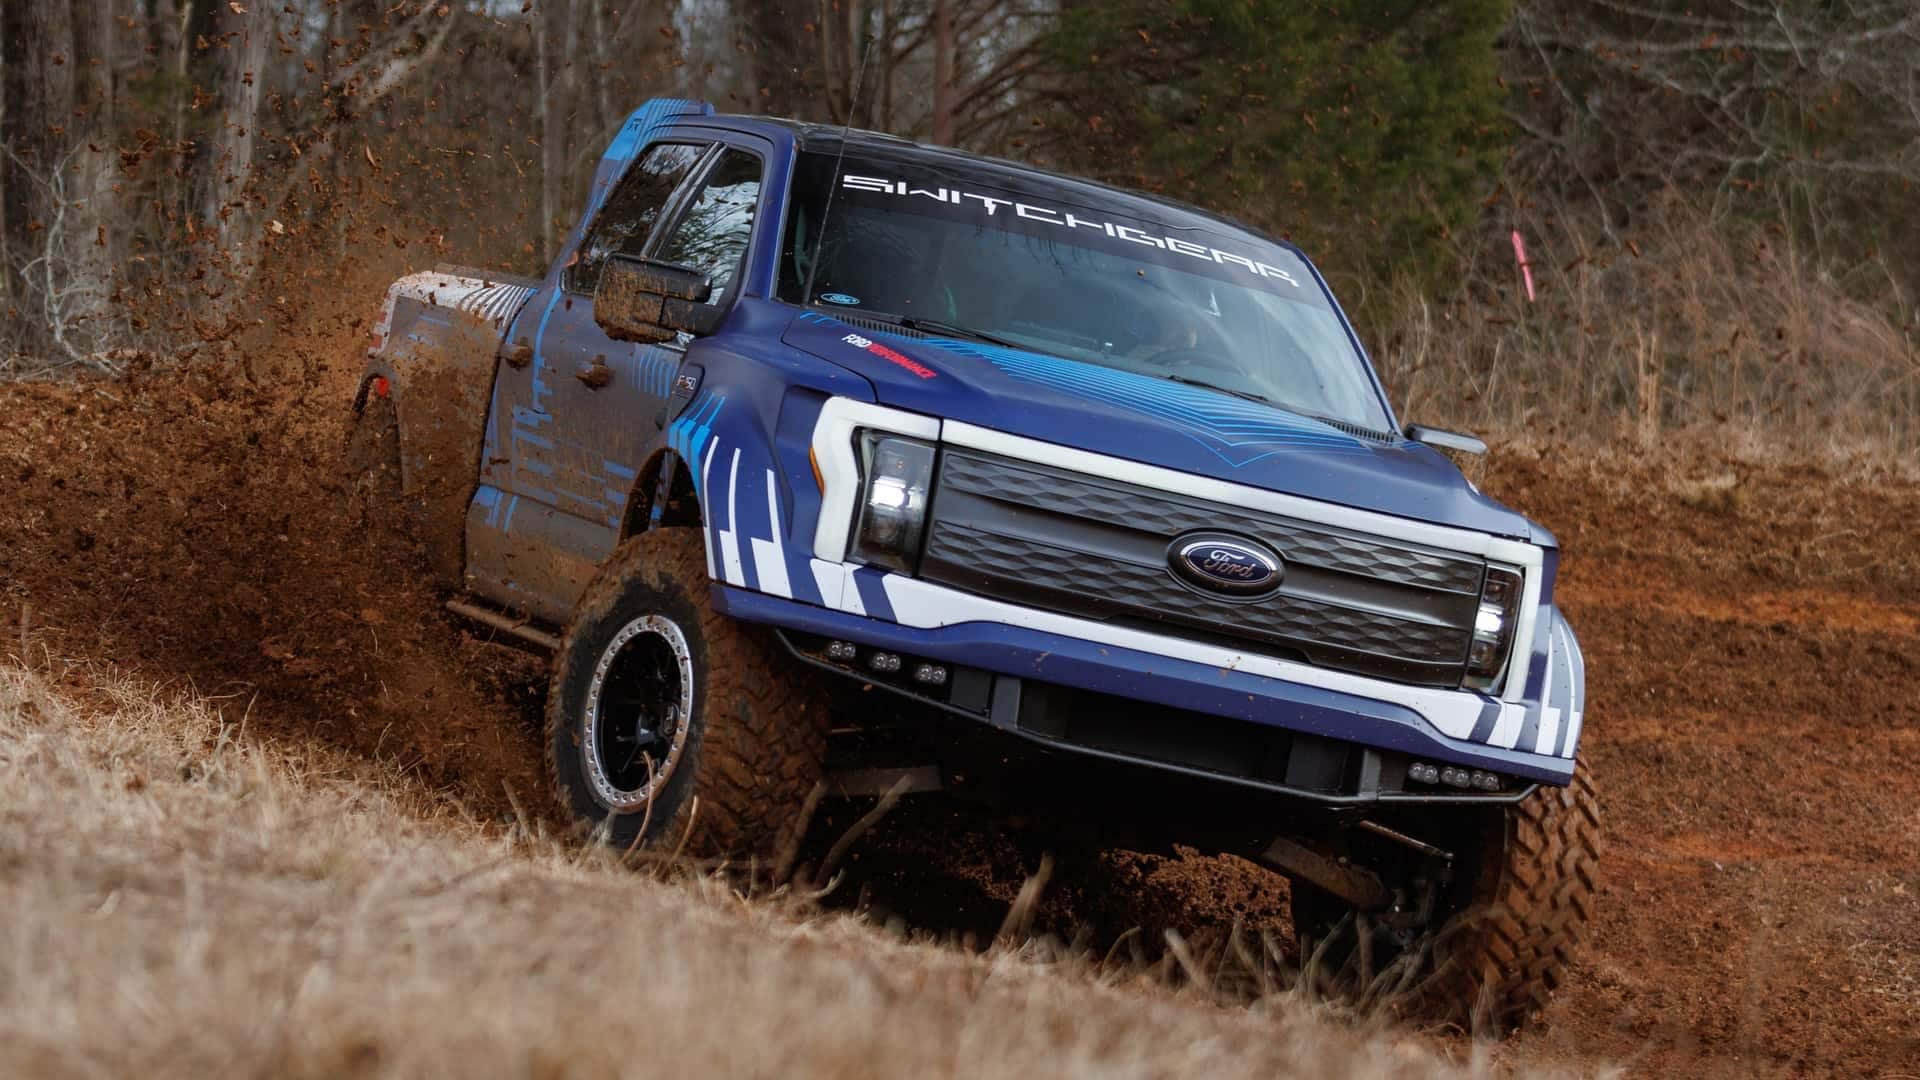 Ford unveils one-off F-150 Lightning for extreme off-roading: Check features